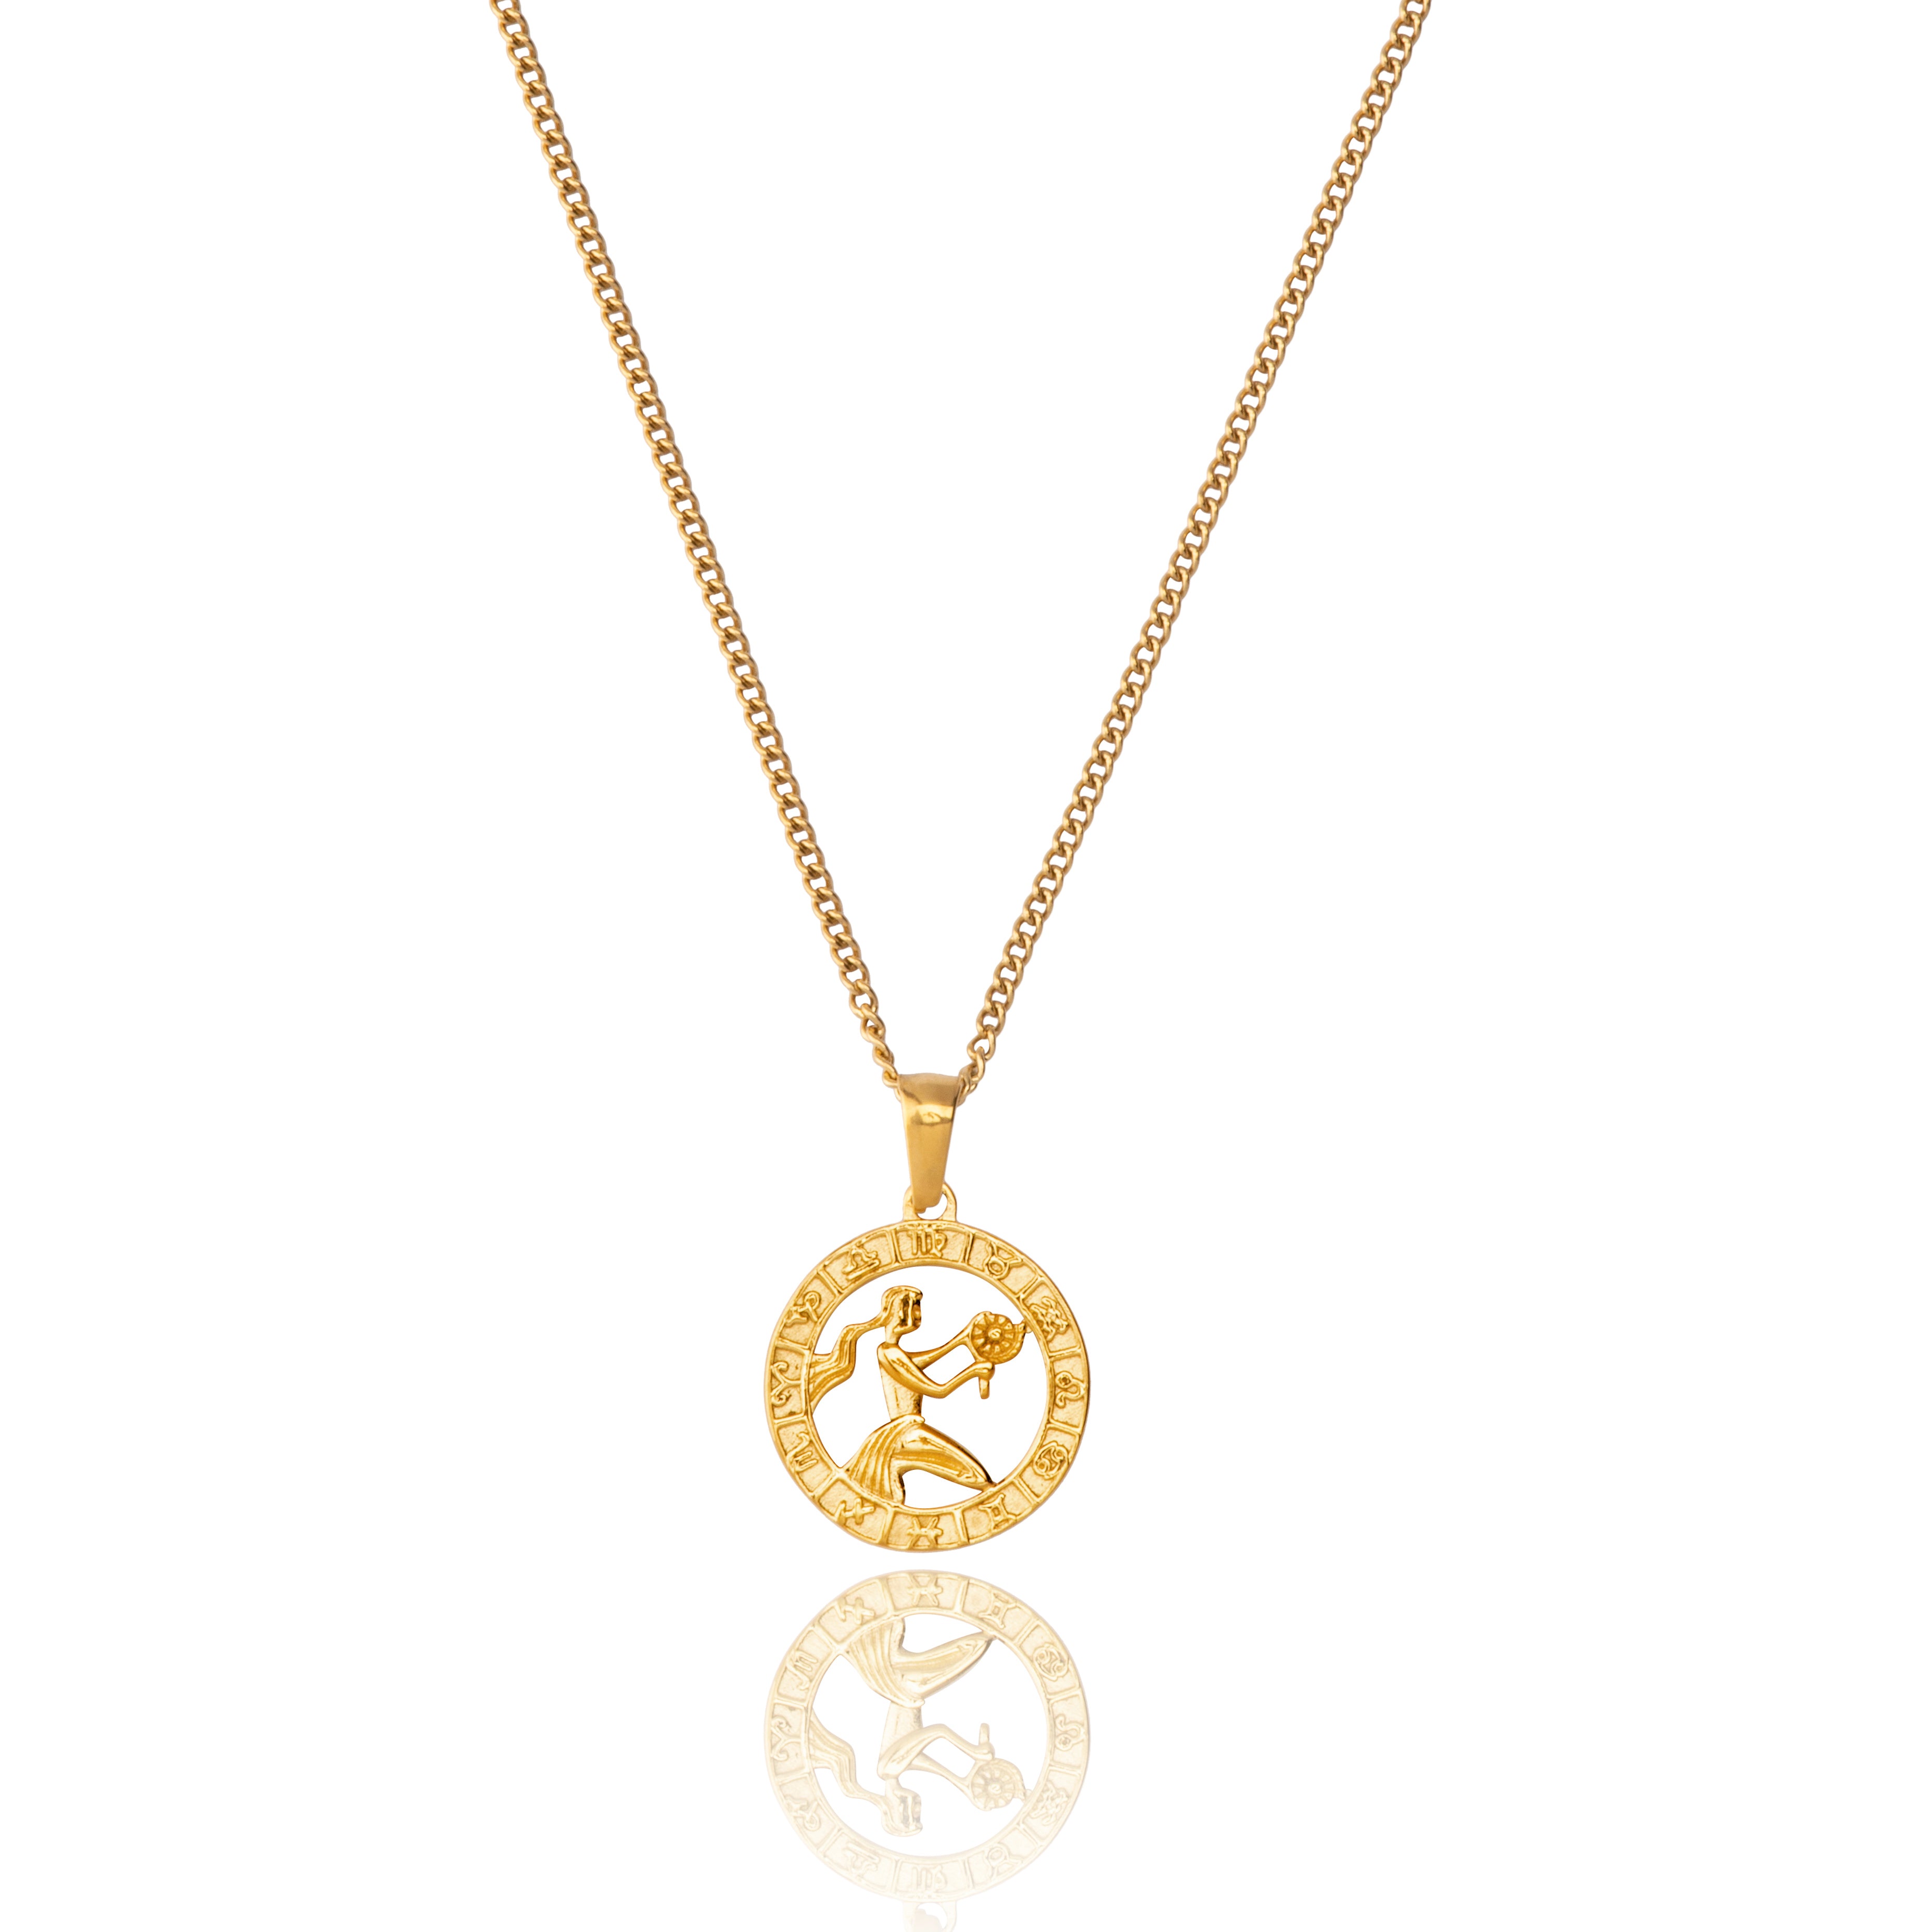 18 K Gold Plated Virgo Zodiac Pendant and Chain